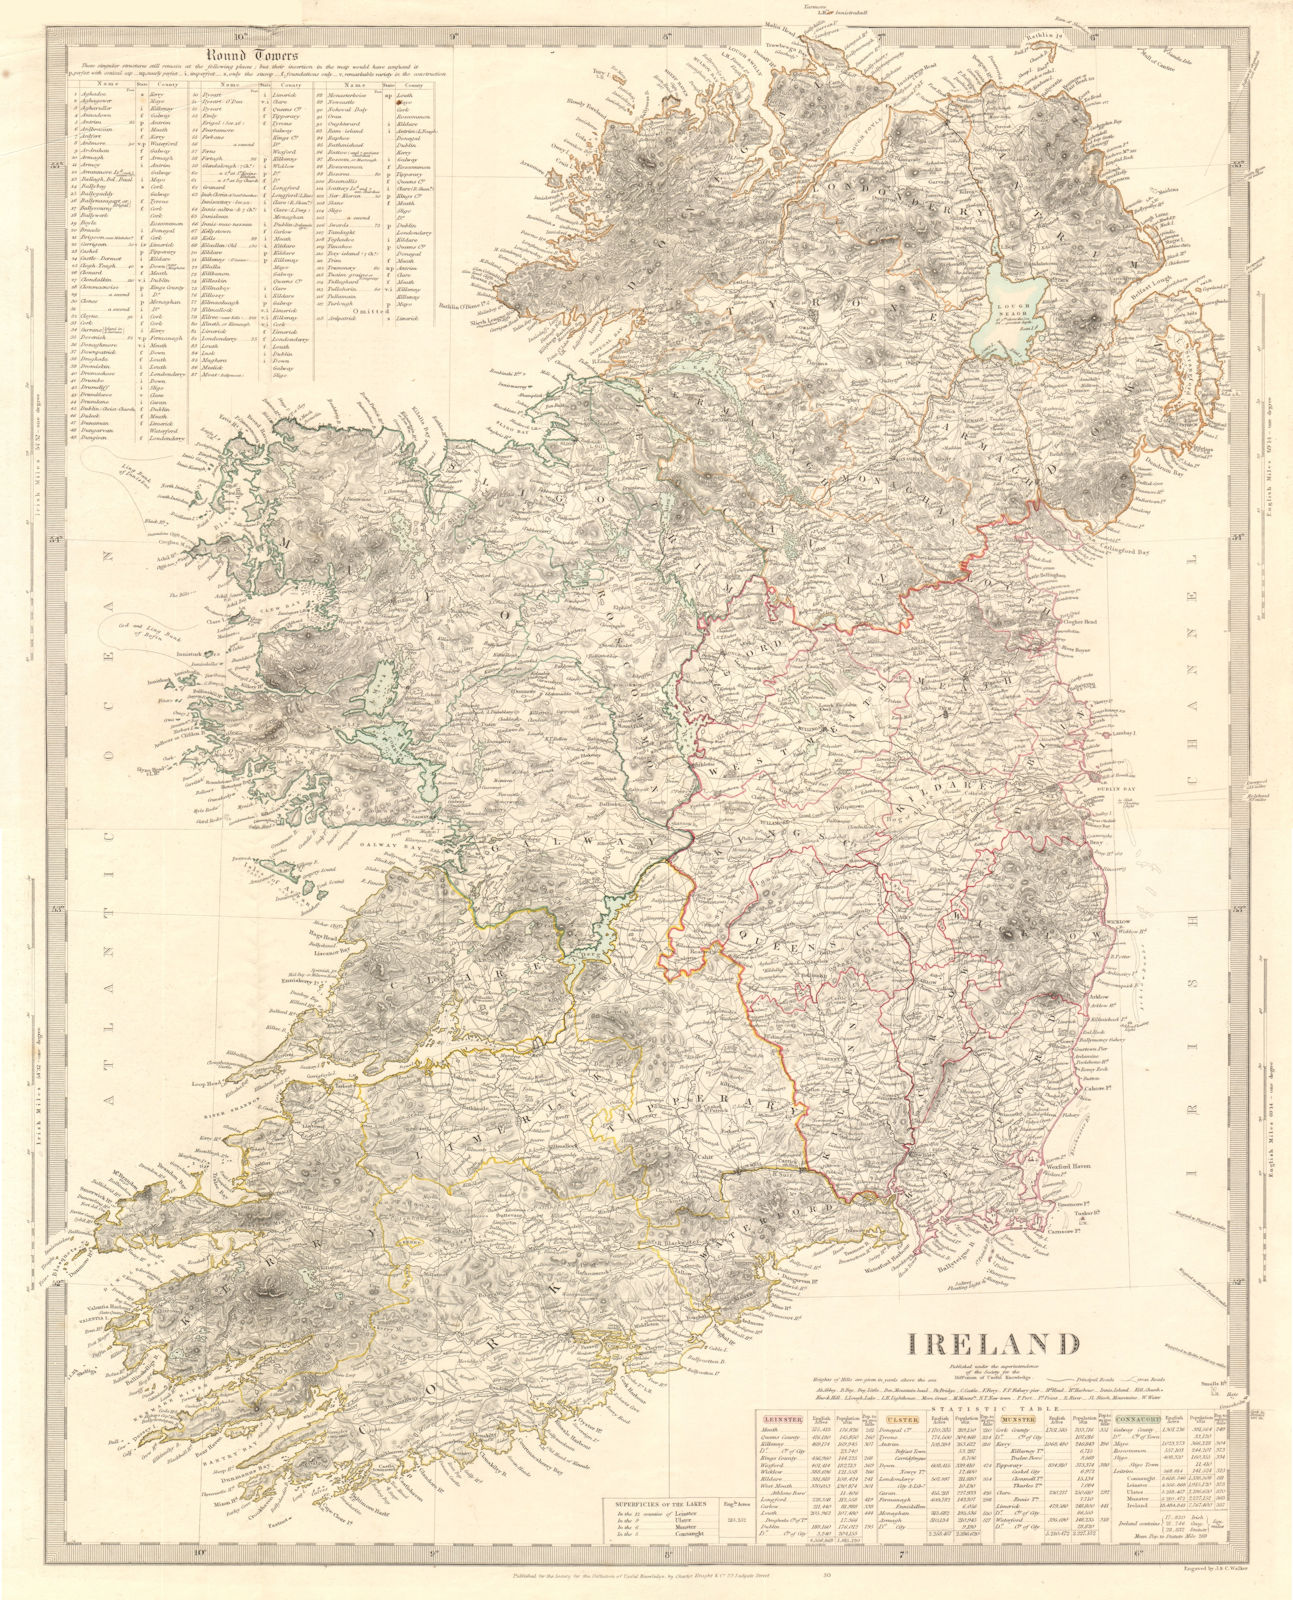 Associate Product IRELAND on 2 sheets conjoined 50x62cm. Round towers Cloigthithe. SDUK 1845 map